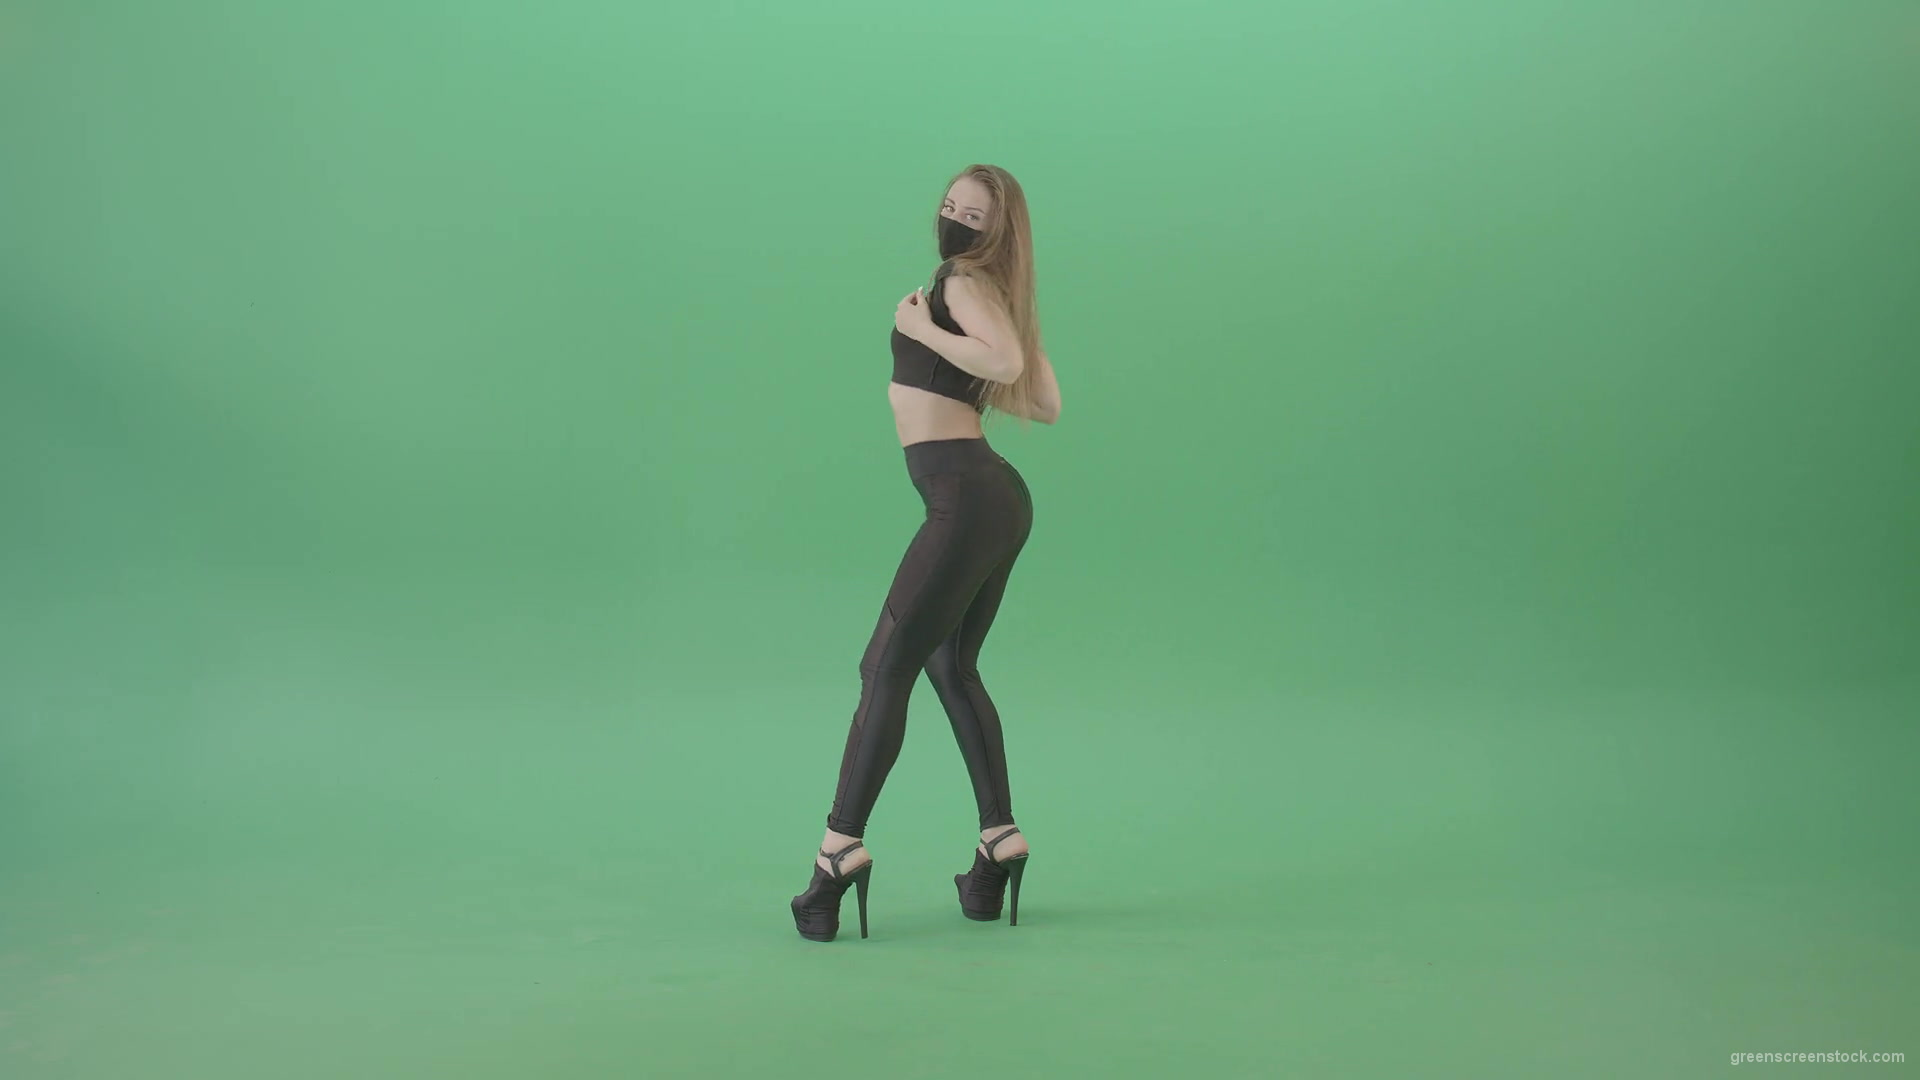 Exotic-sexy-dance-by-girl-in-black-latex-dress-isolated-on-green-screen-4K-Video-Footage-1920_009 Green Screen Stock